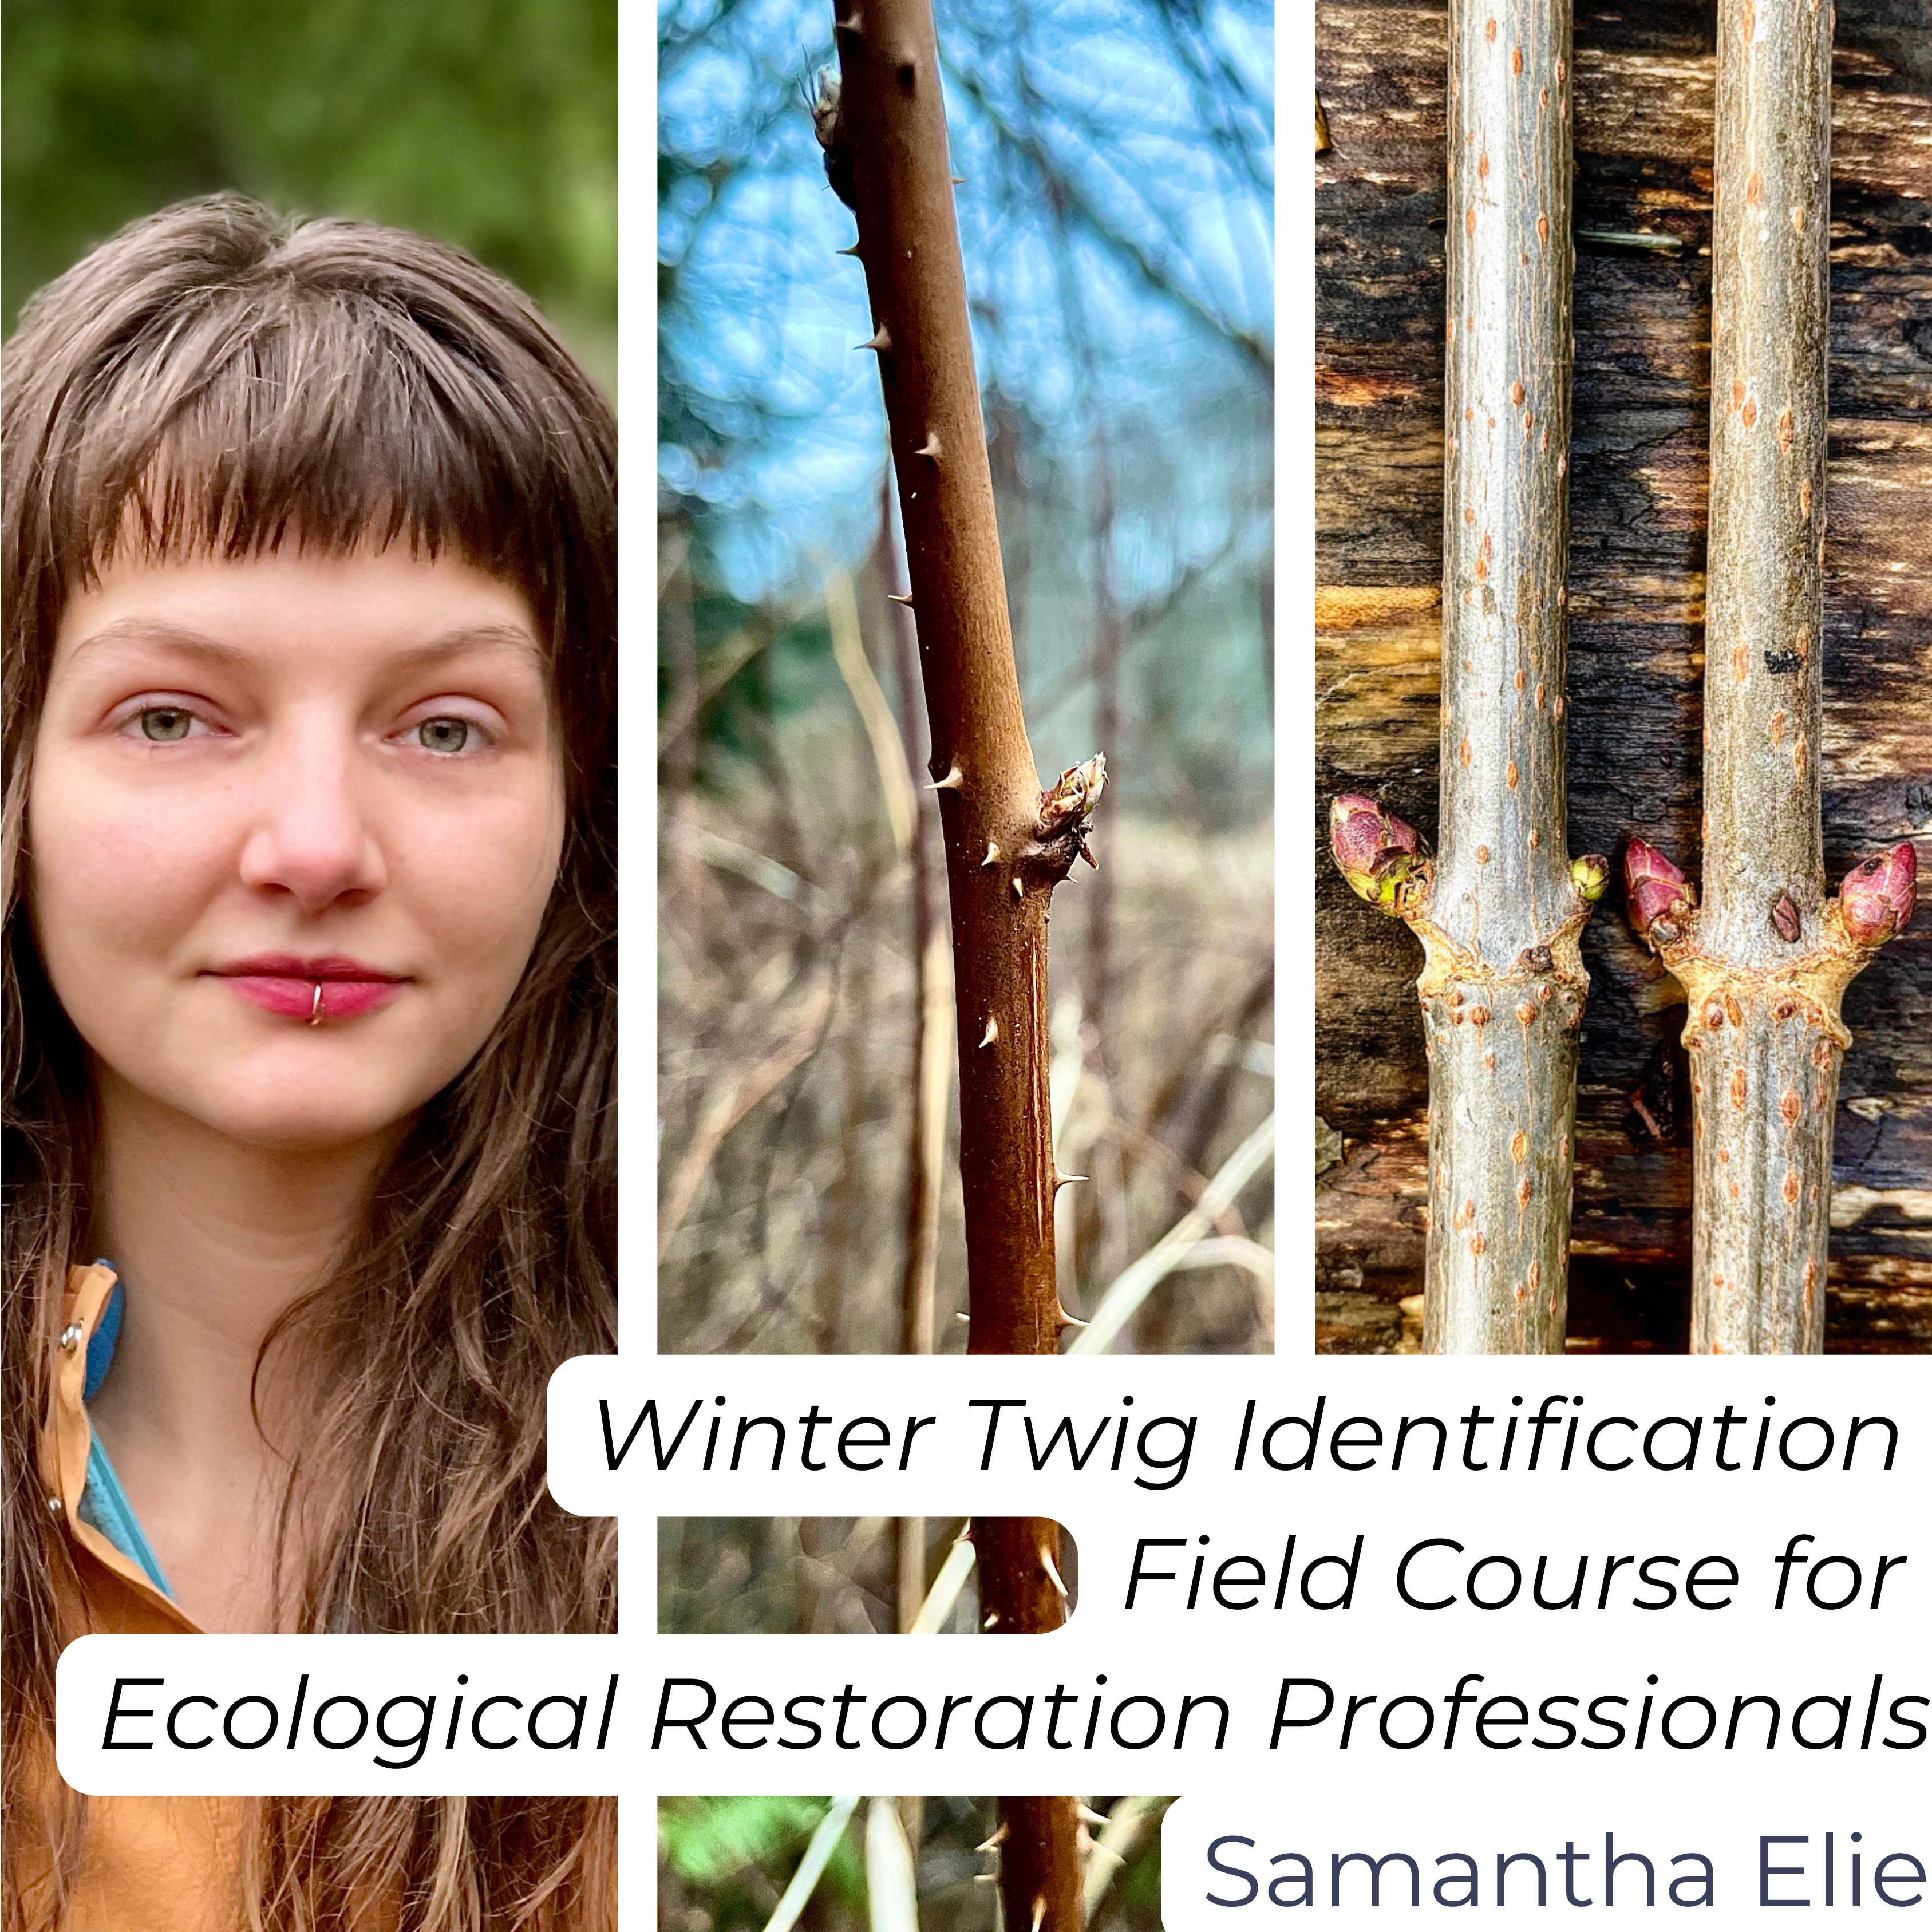 Winter Twig Identification Field Course for Ecological Restoration Professionals Sound Native Plants